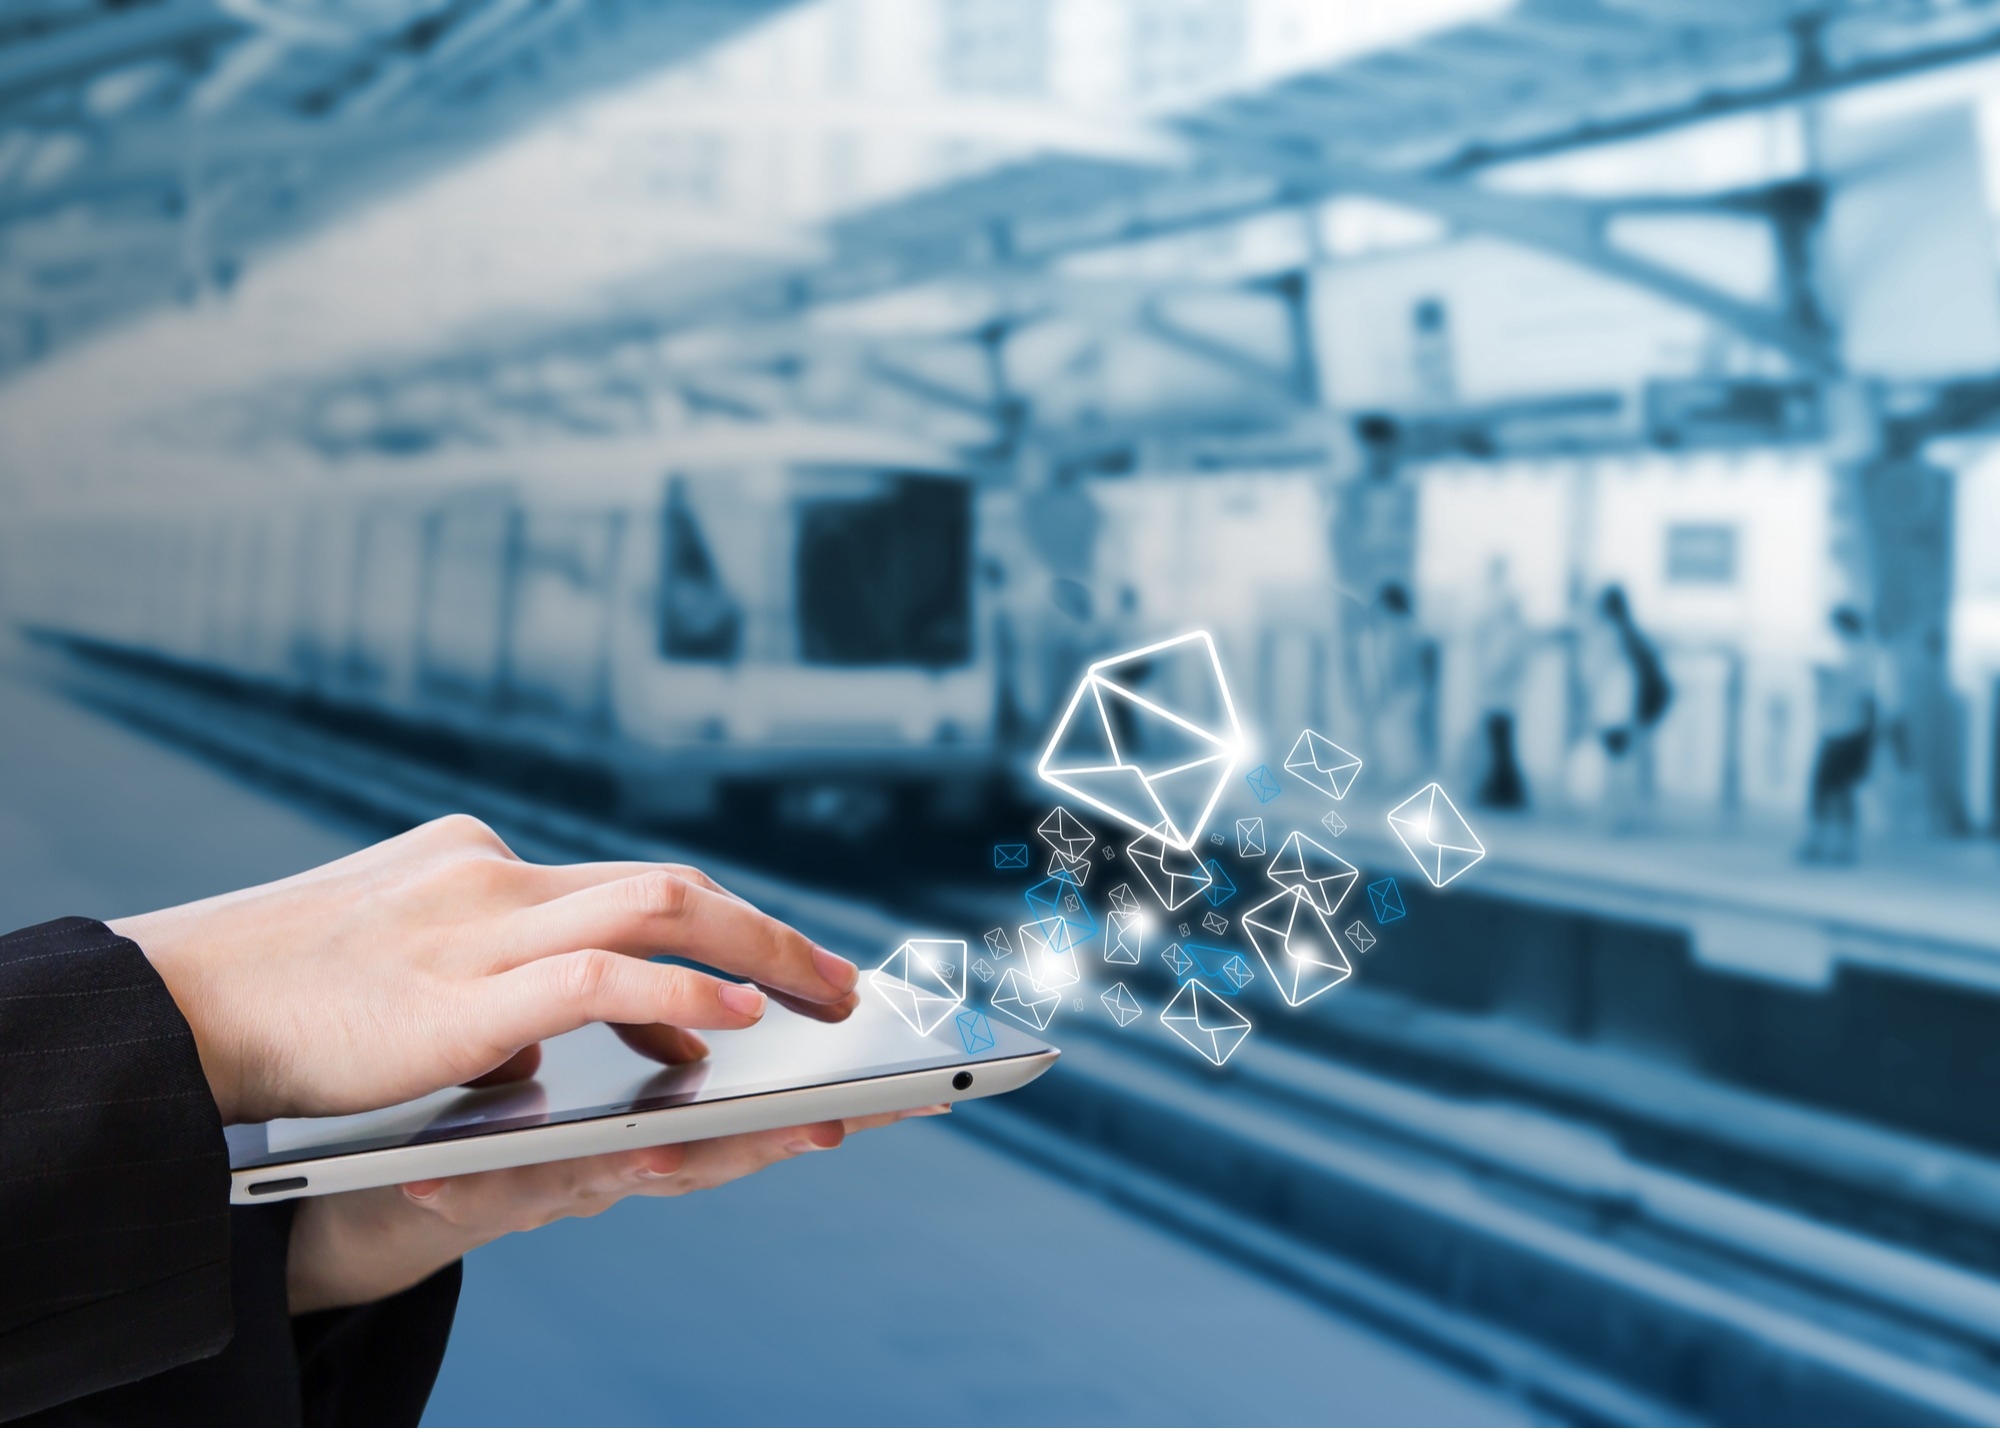 
The Best Ways to Boost Your Business’ Visibility in 2021 Using Email Marketing